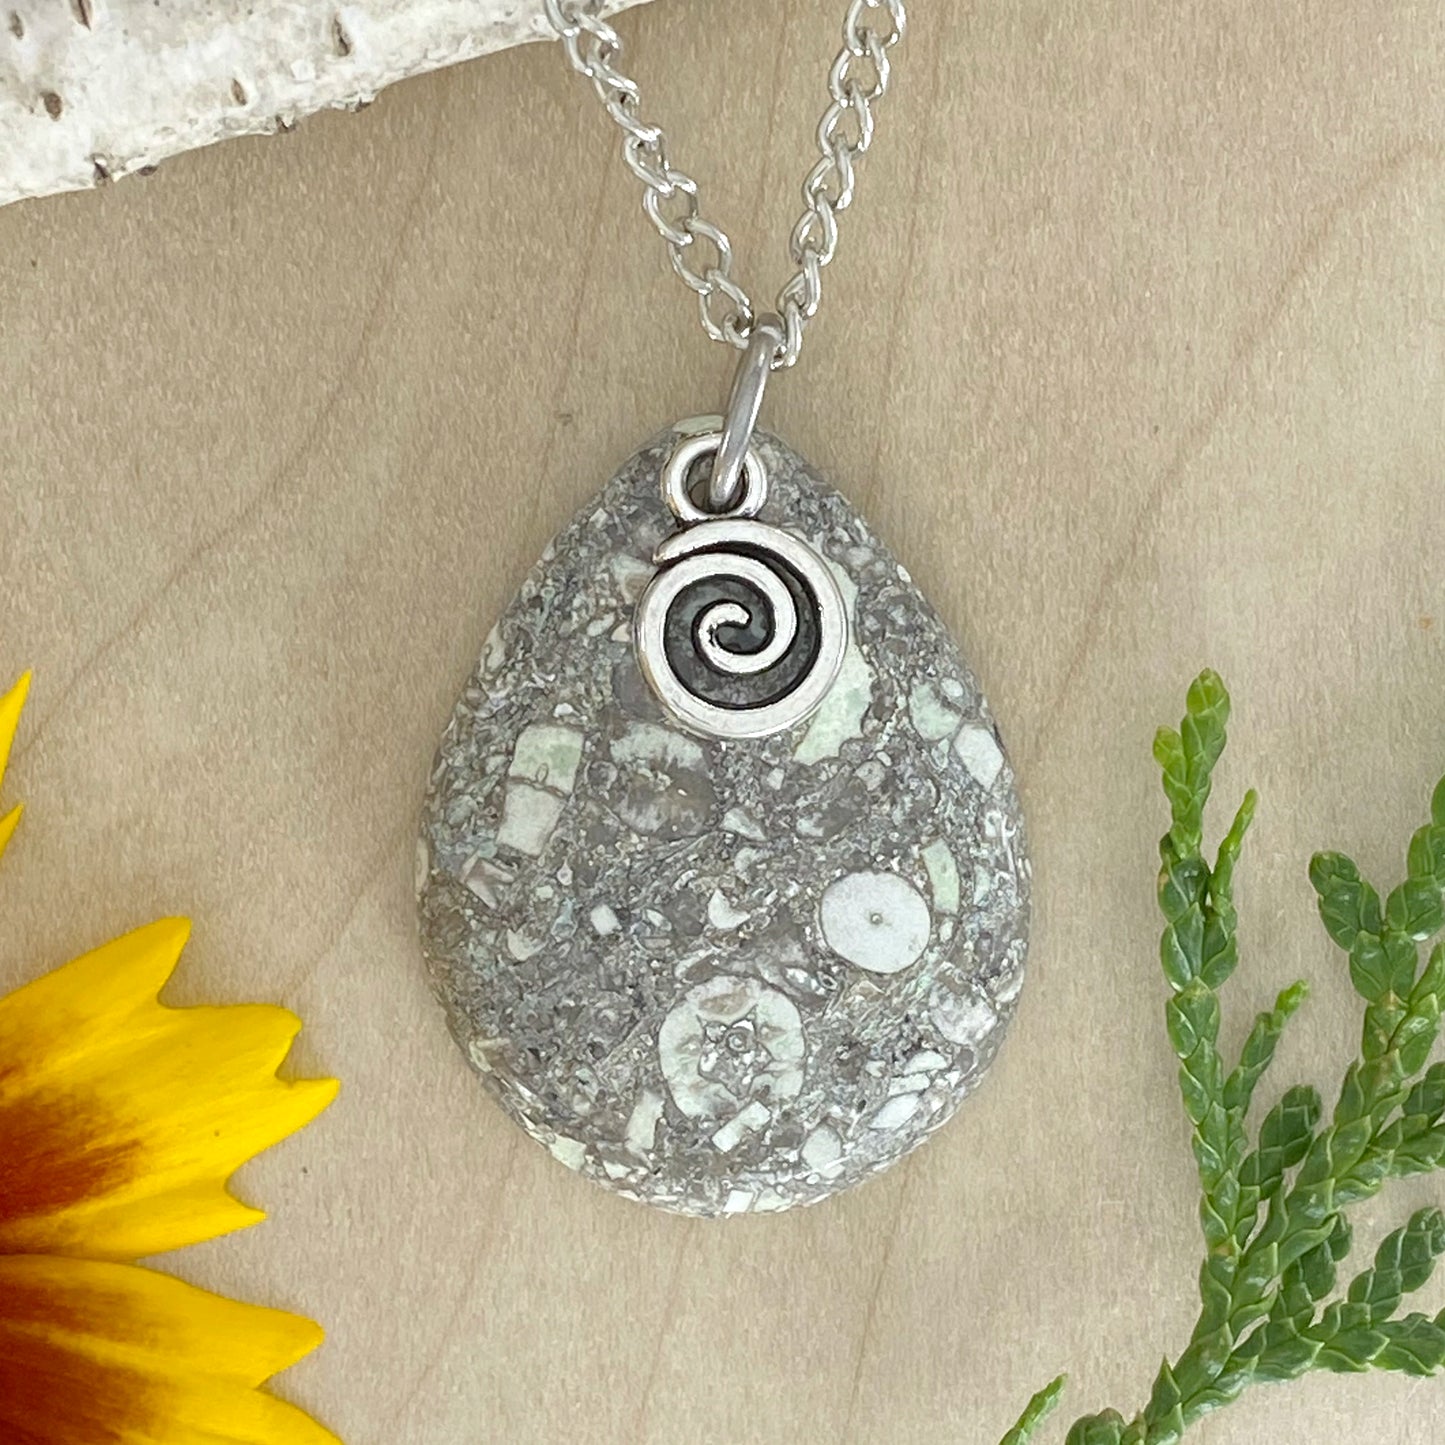 Crinoid Fossil Swirl Pendant Necklace - Stone Treasures by the Lake